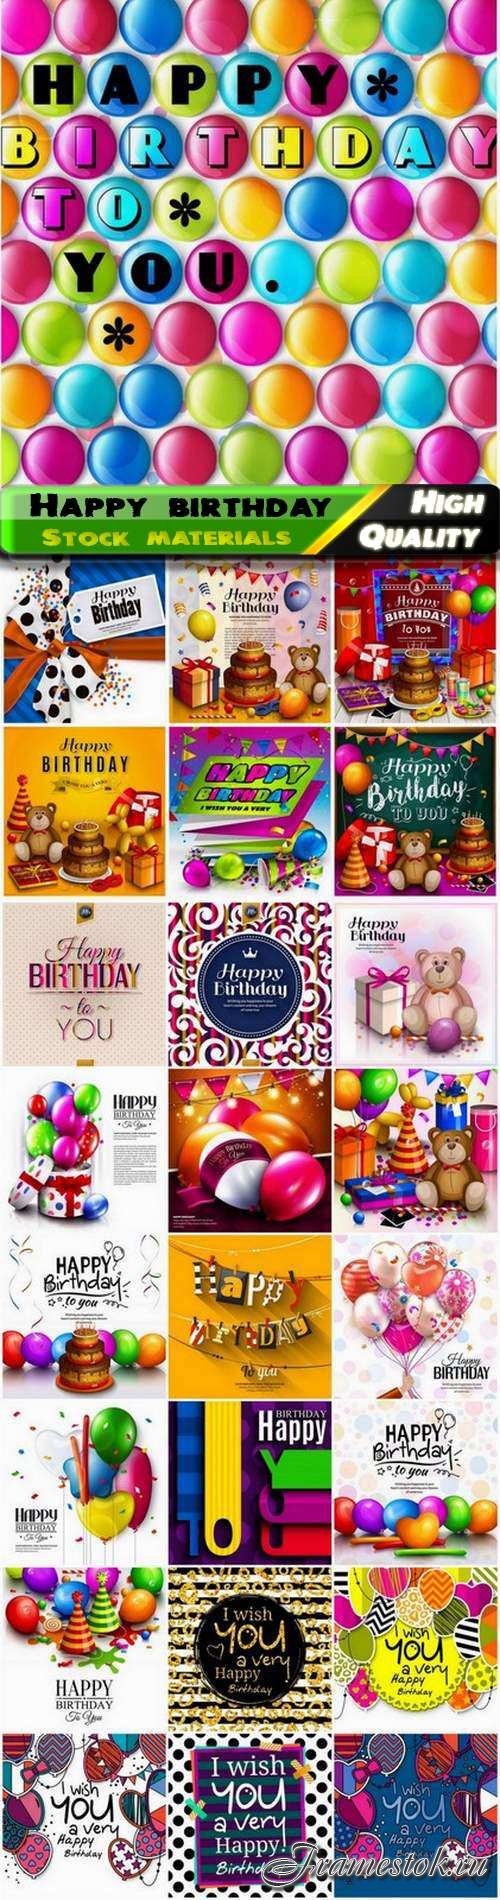 Greeting happy birthday card with balloon confetti cake gift 25 Eps